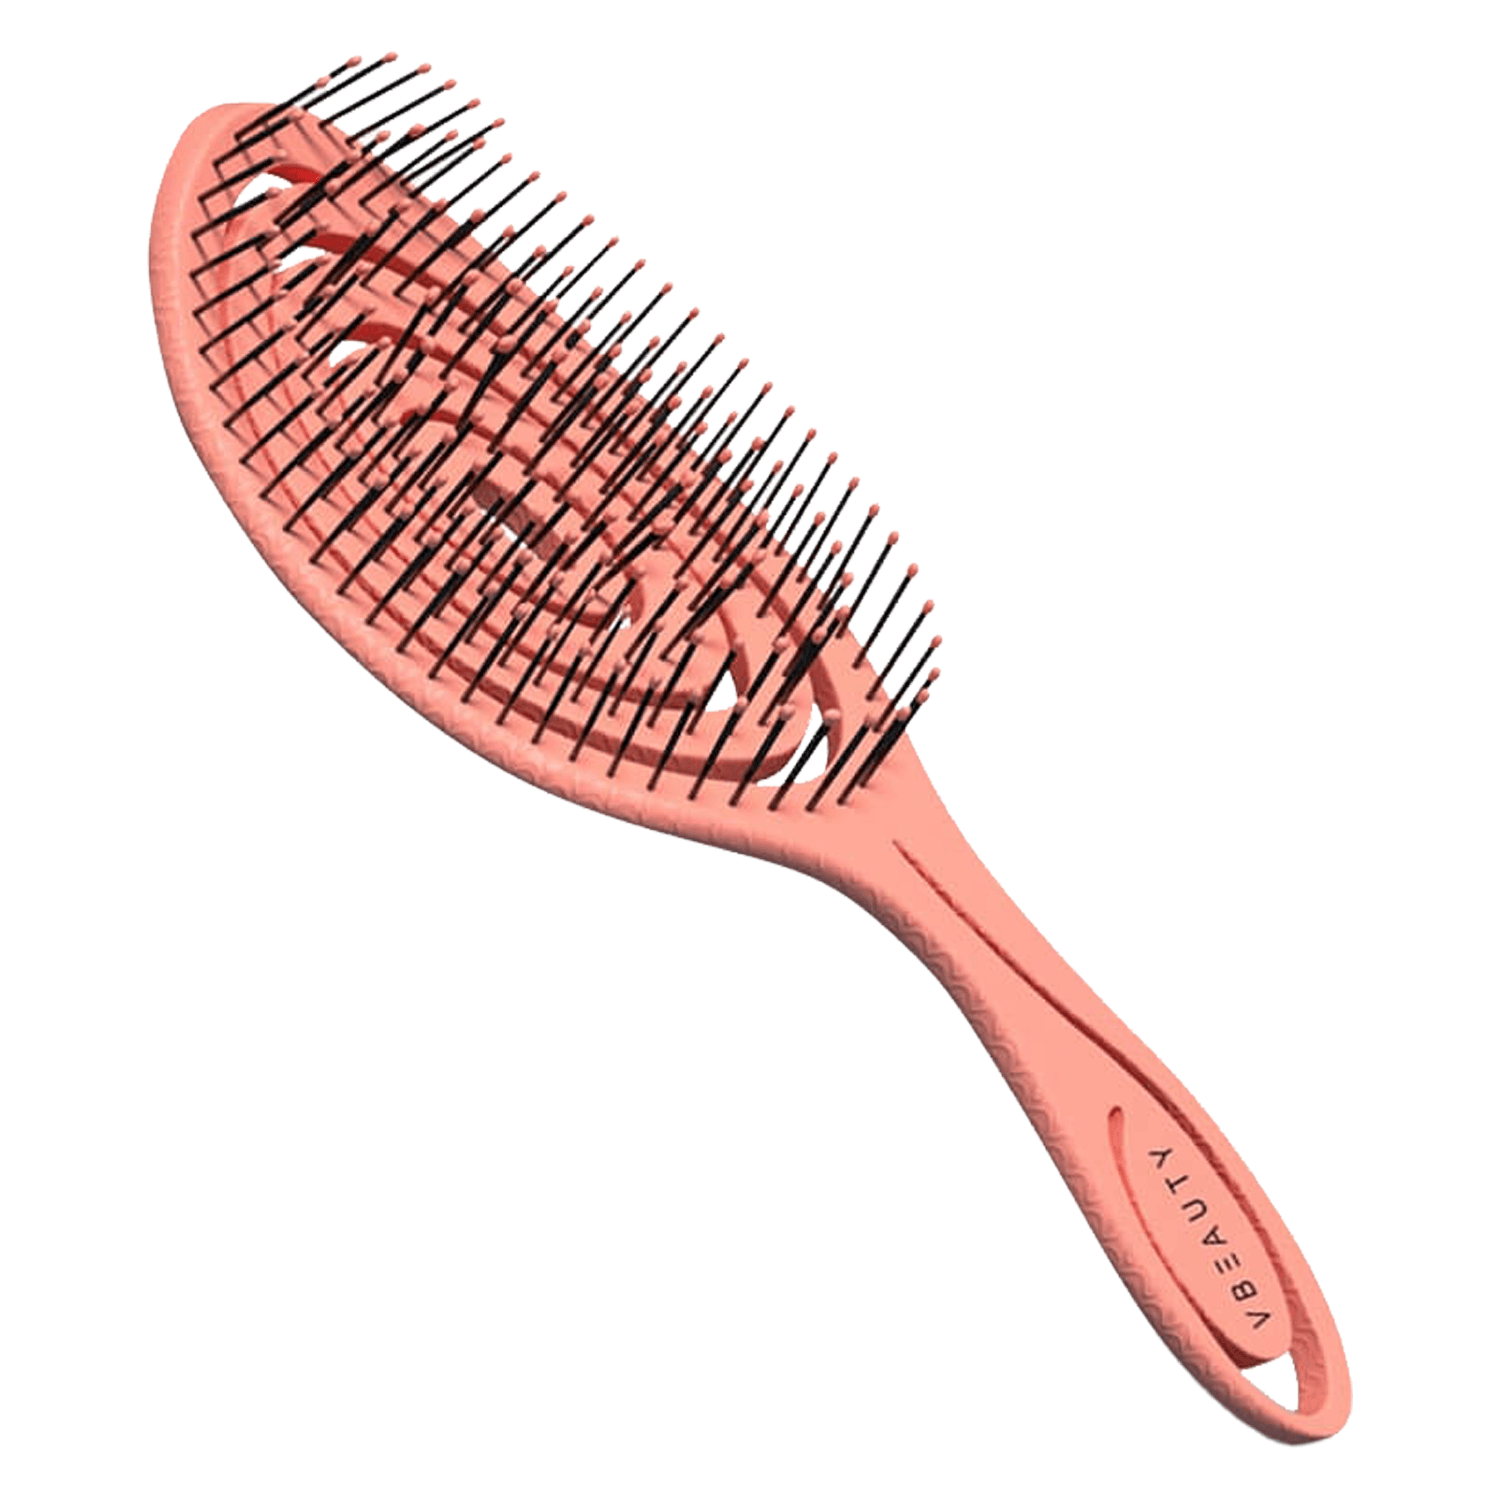 VBEAUTY Hair - Straw Brush The Coral